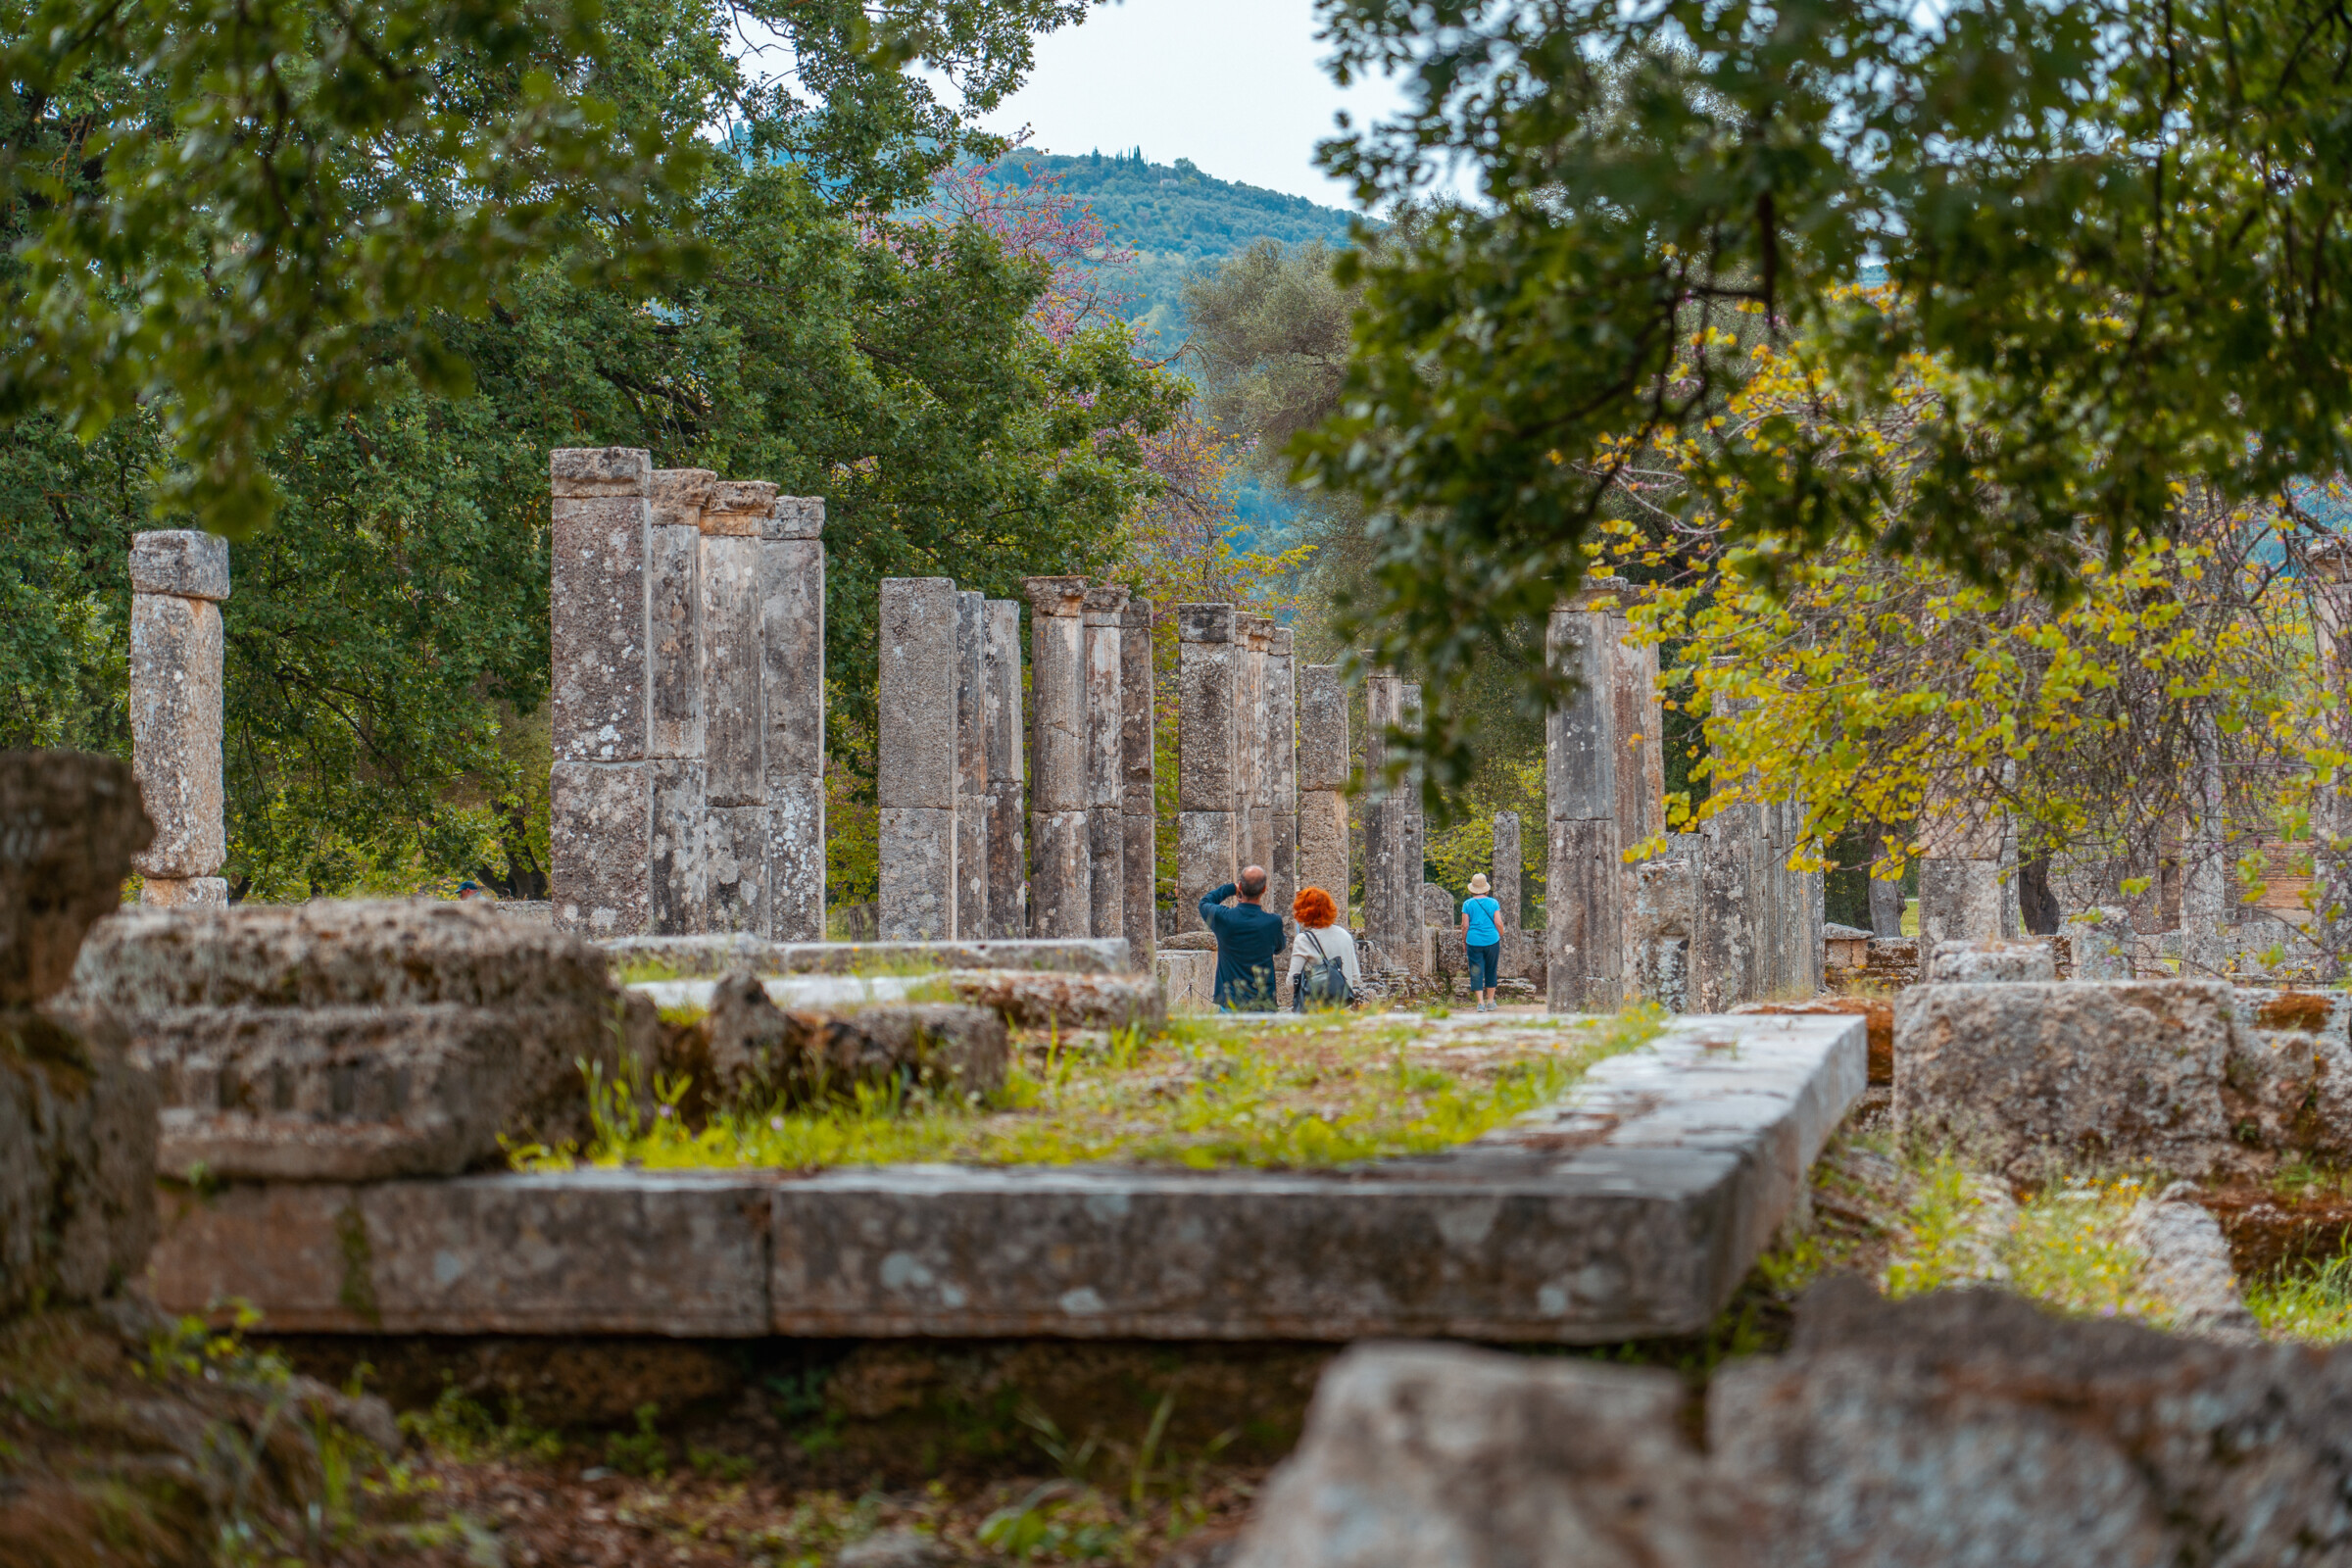 This image shows ancient columns and people walking among them. 